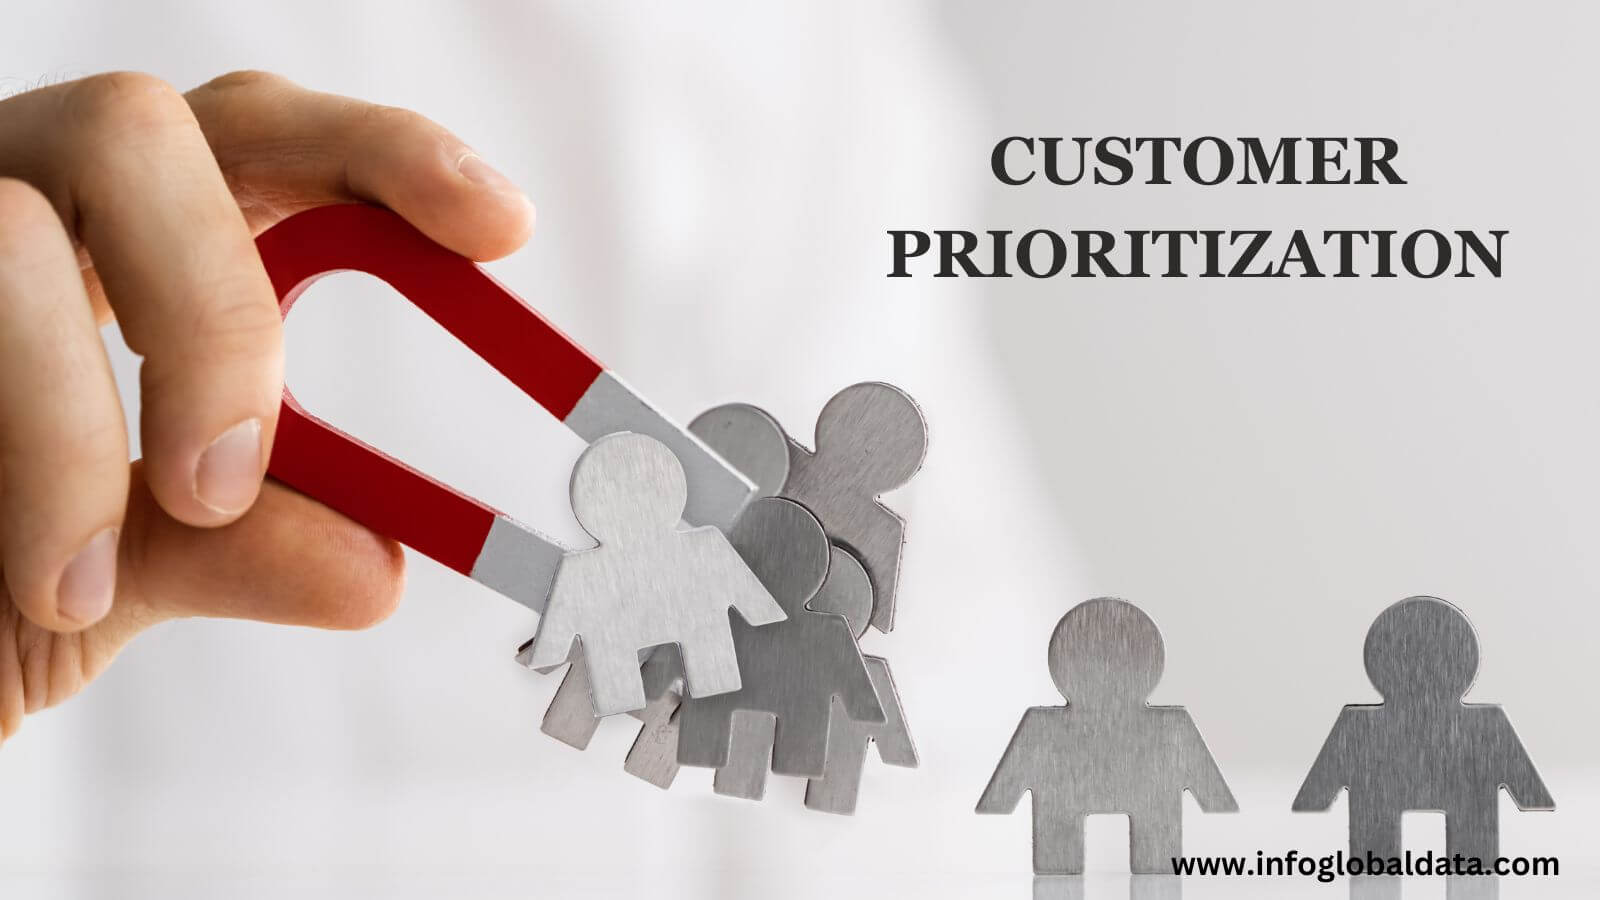 do not prioritize customers